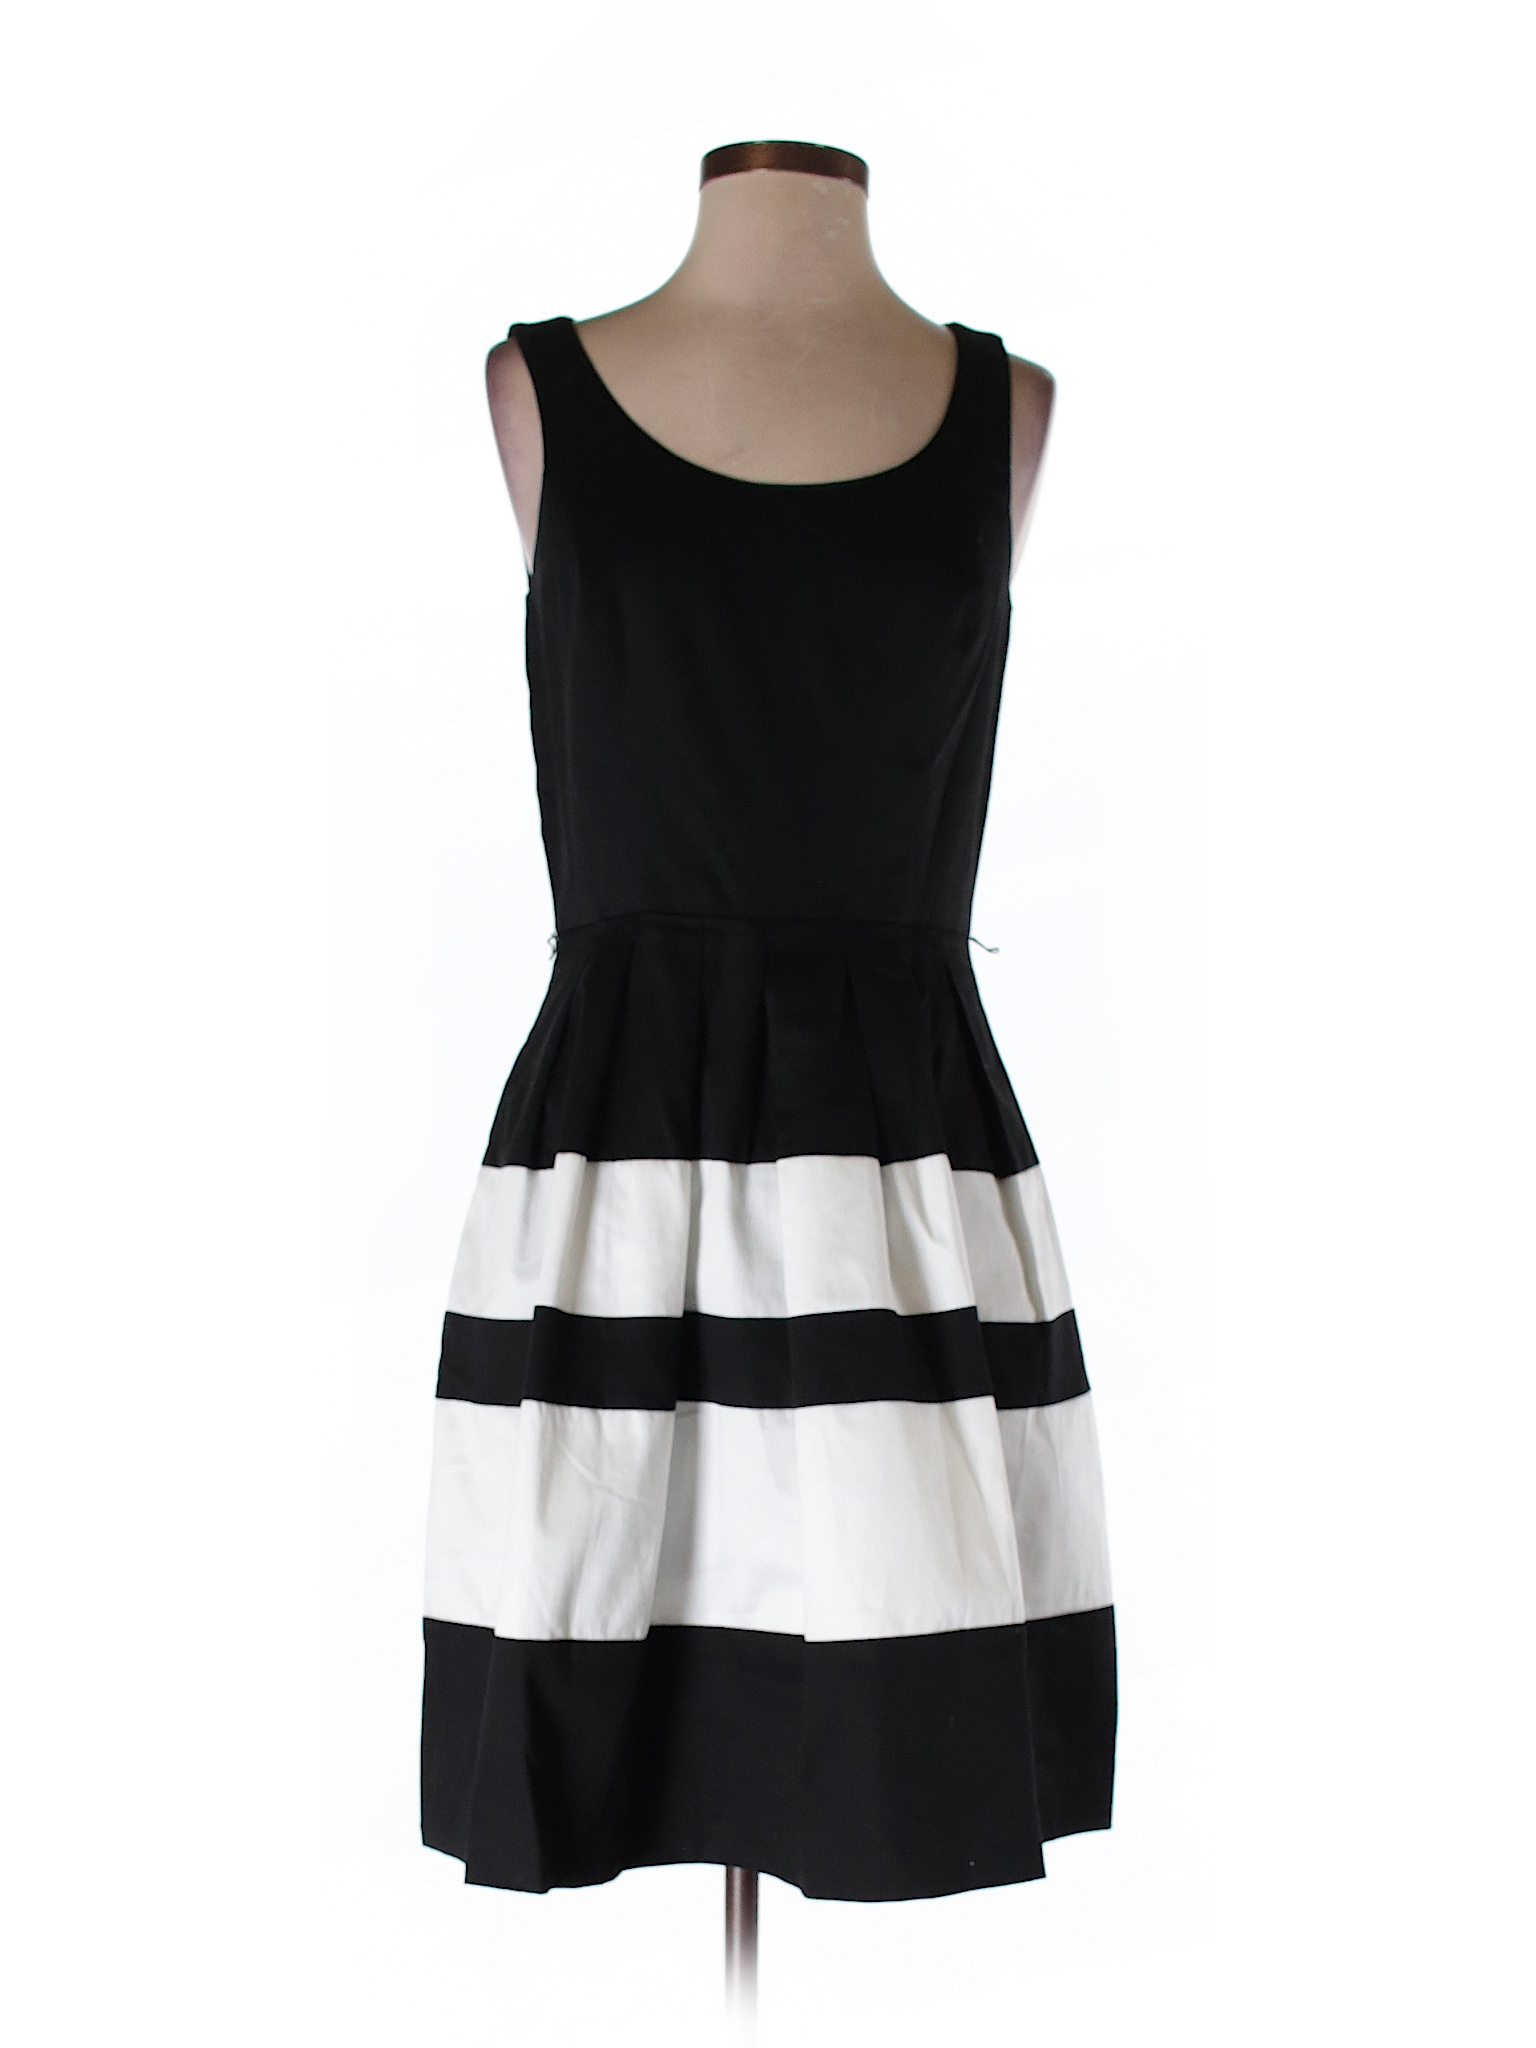 White House Black Market Casual Dress - 67% off only on thredUP